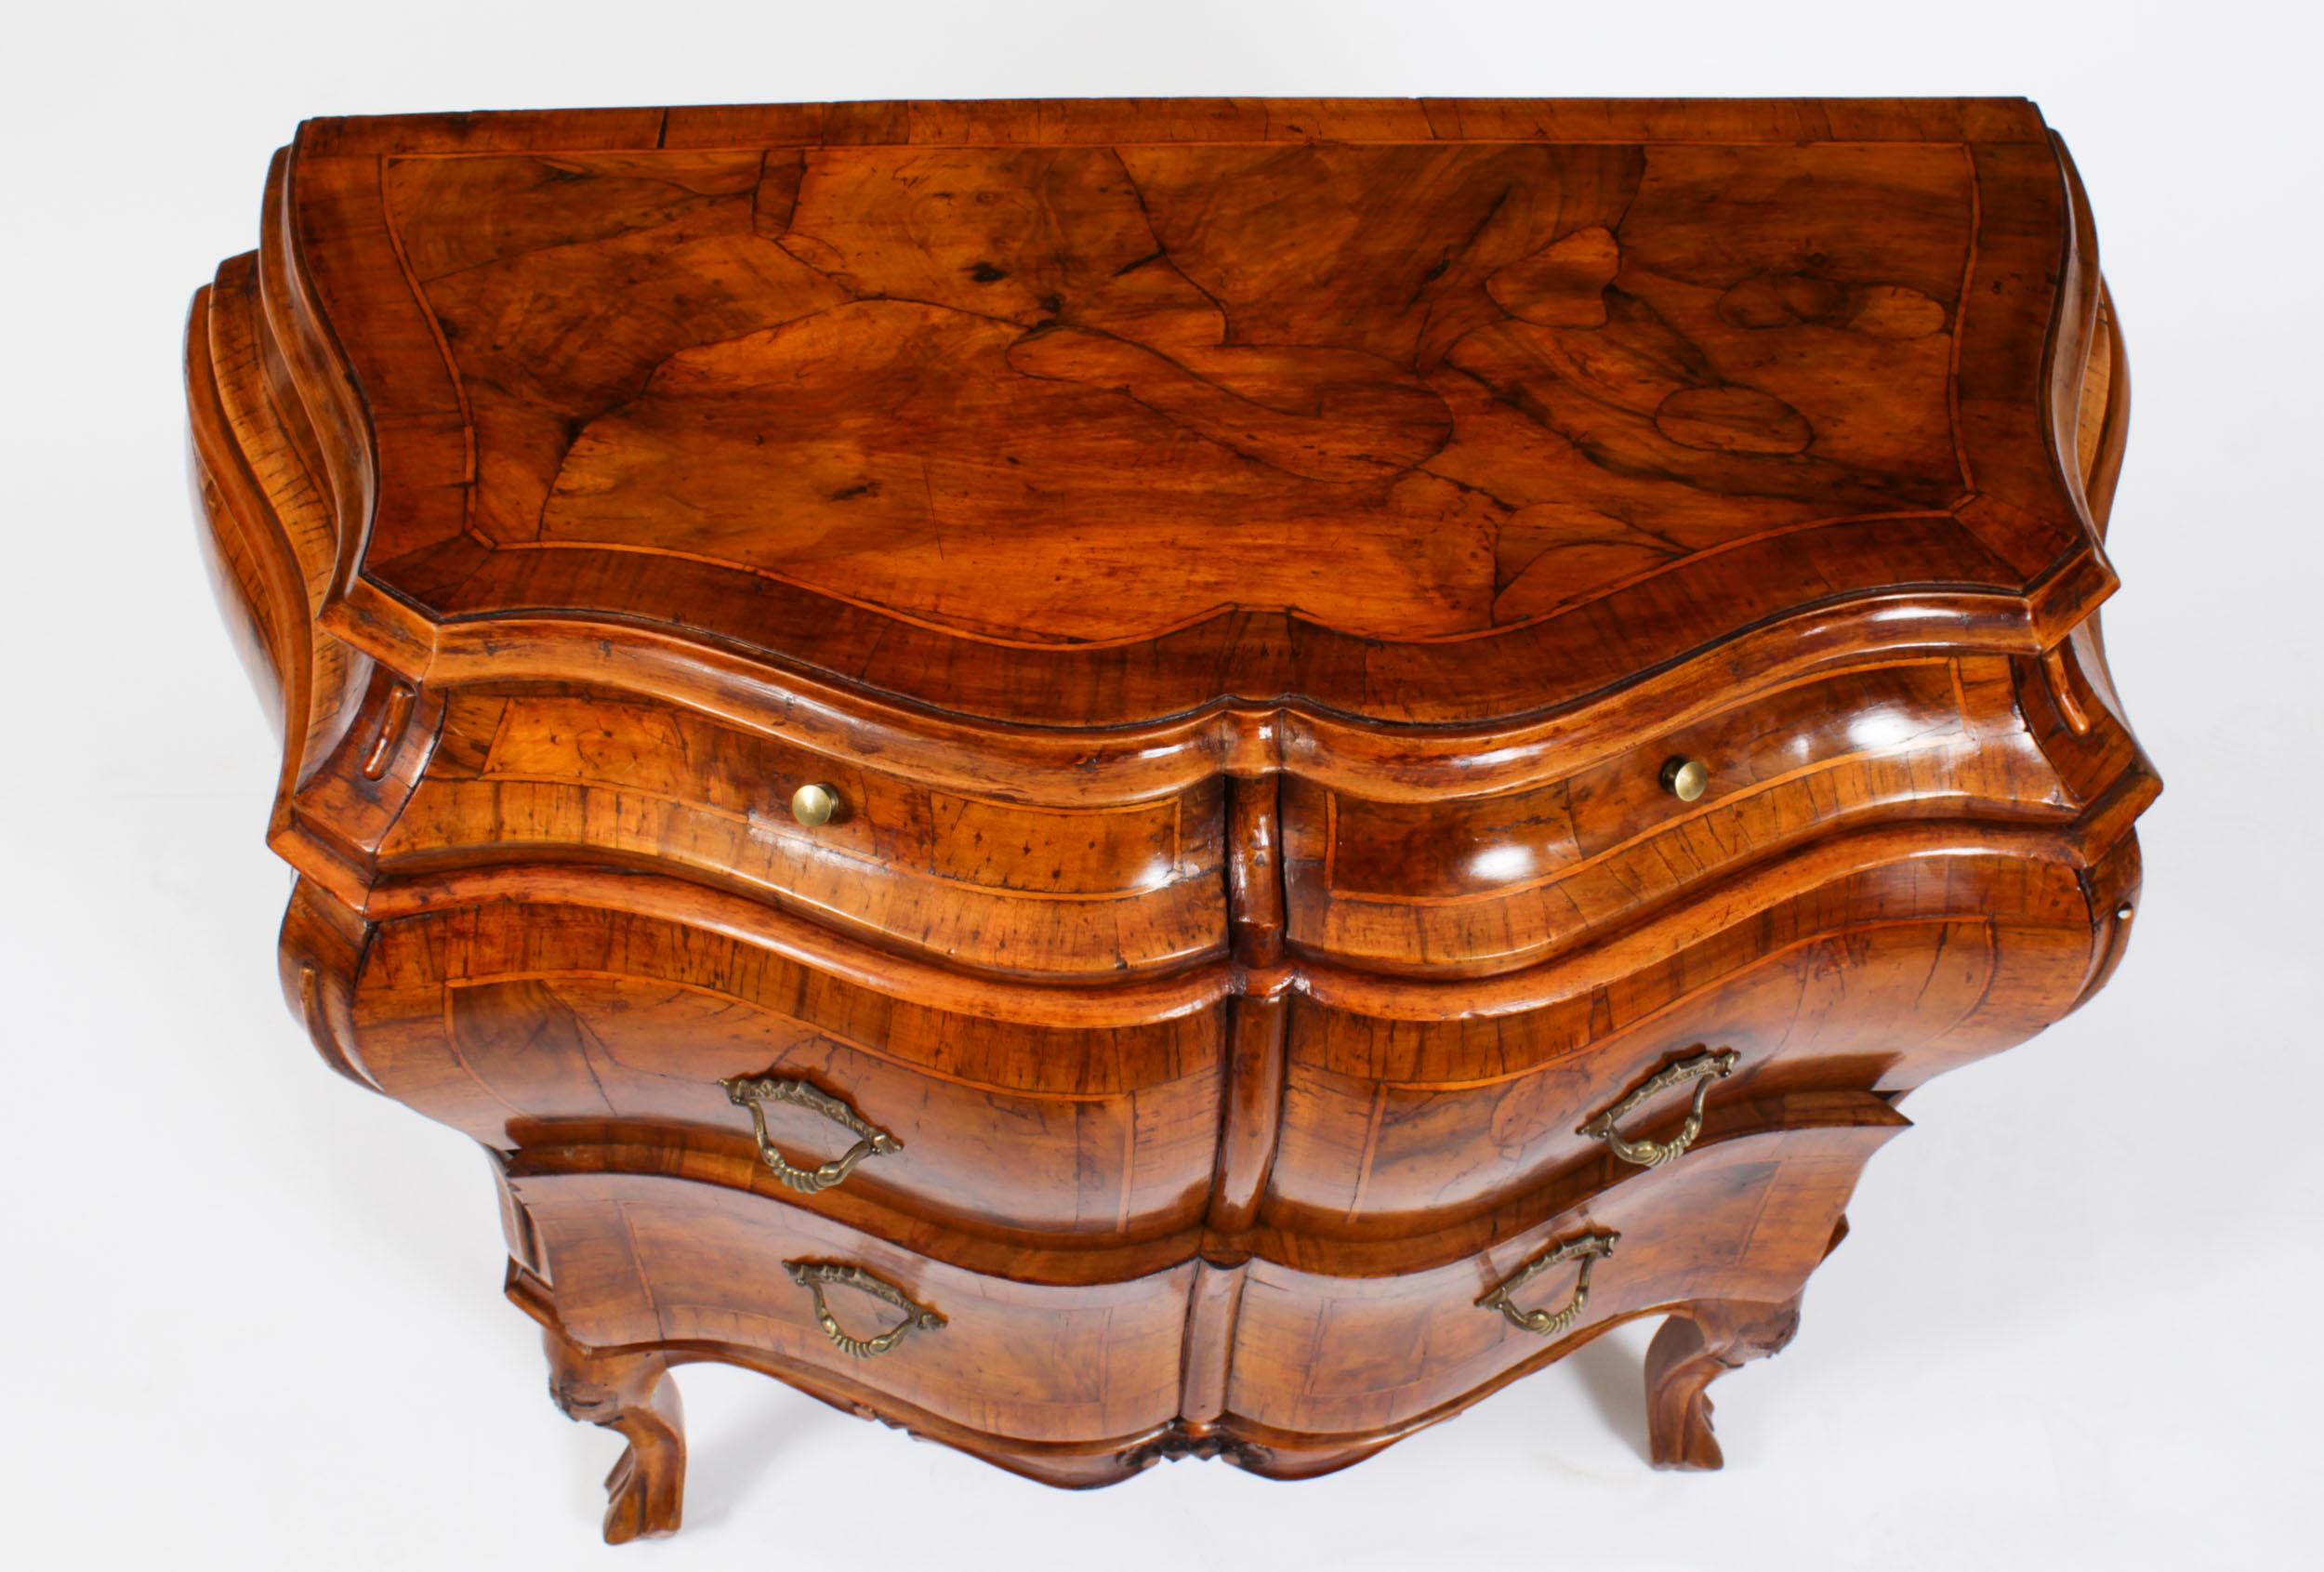 Antique Italian Venetian Walnut Bombe Commode Chest Mid-20th Century In Good Condition For Sale In London, GB